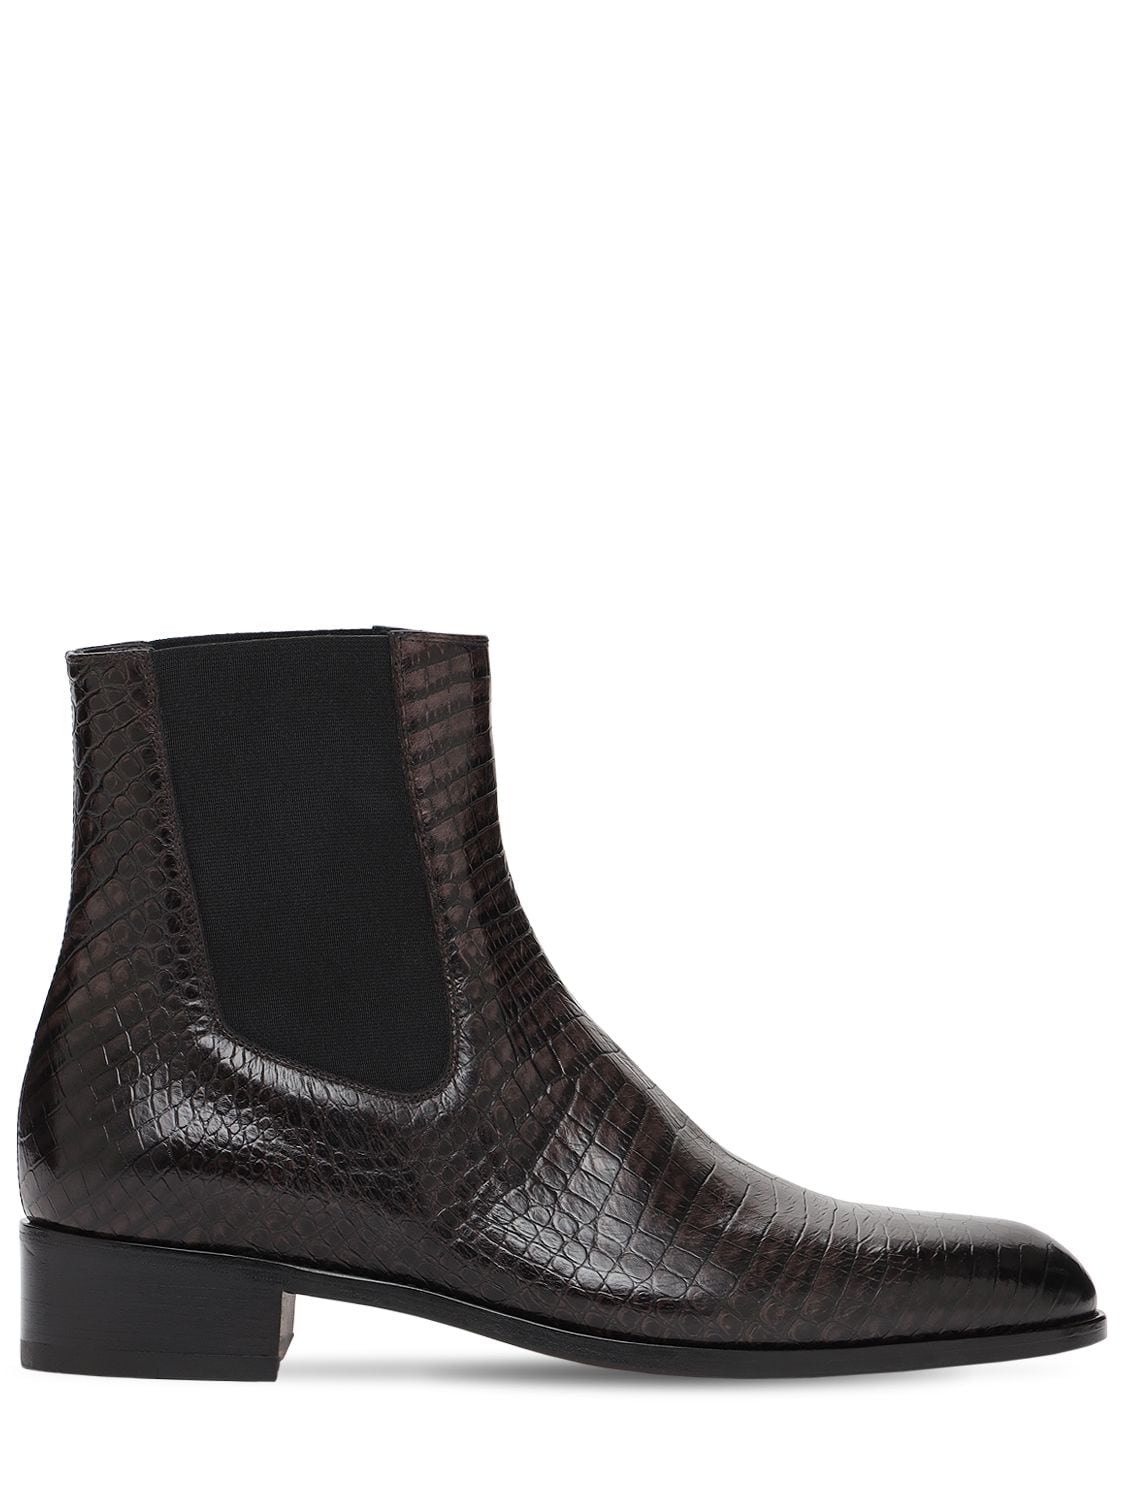 TOM FORD CROC EMBOSSED LEATHER ANKLE BOOTS,74IY29009-VTCWMJM1